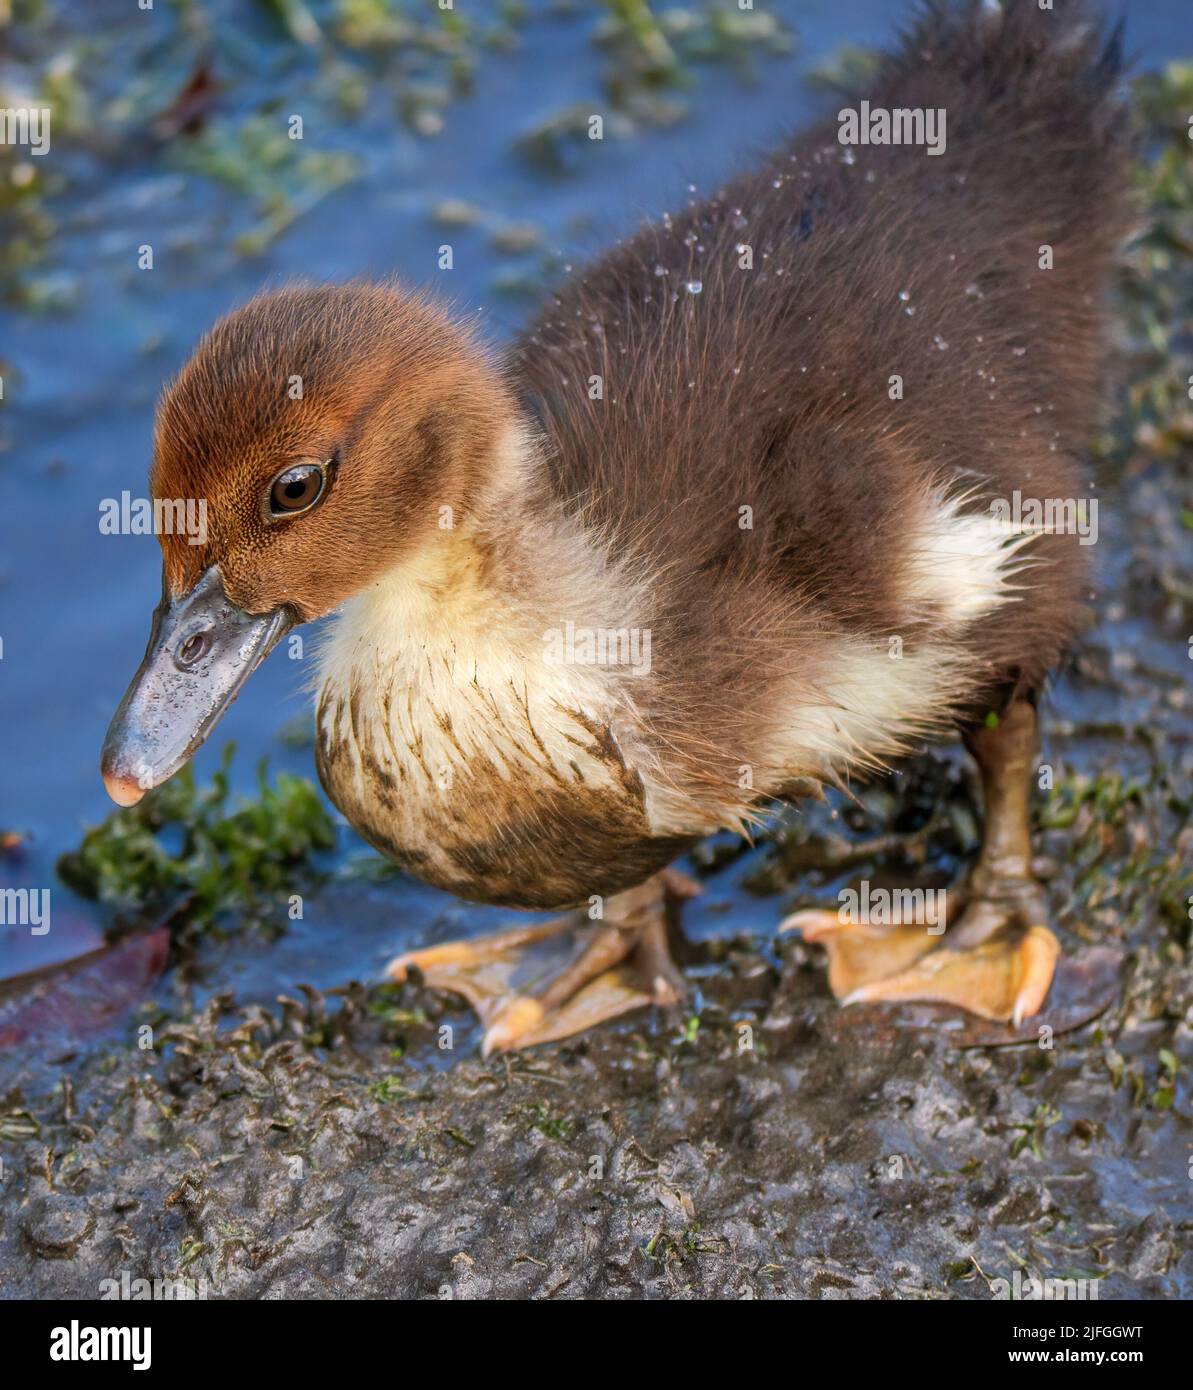 A closeup shot of a Muscovy duckling near a lake during the day Stock Photo